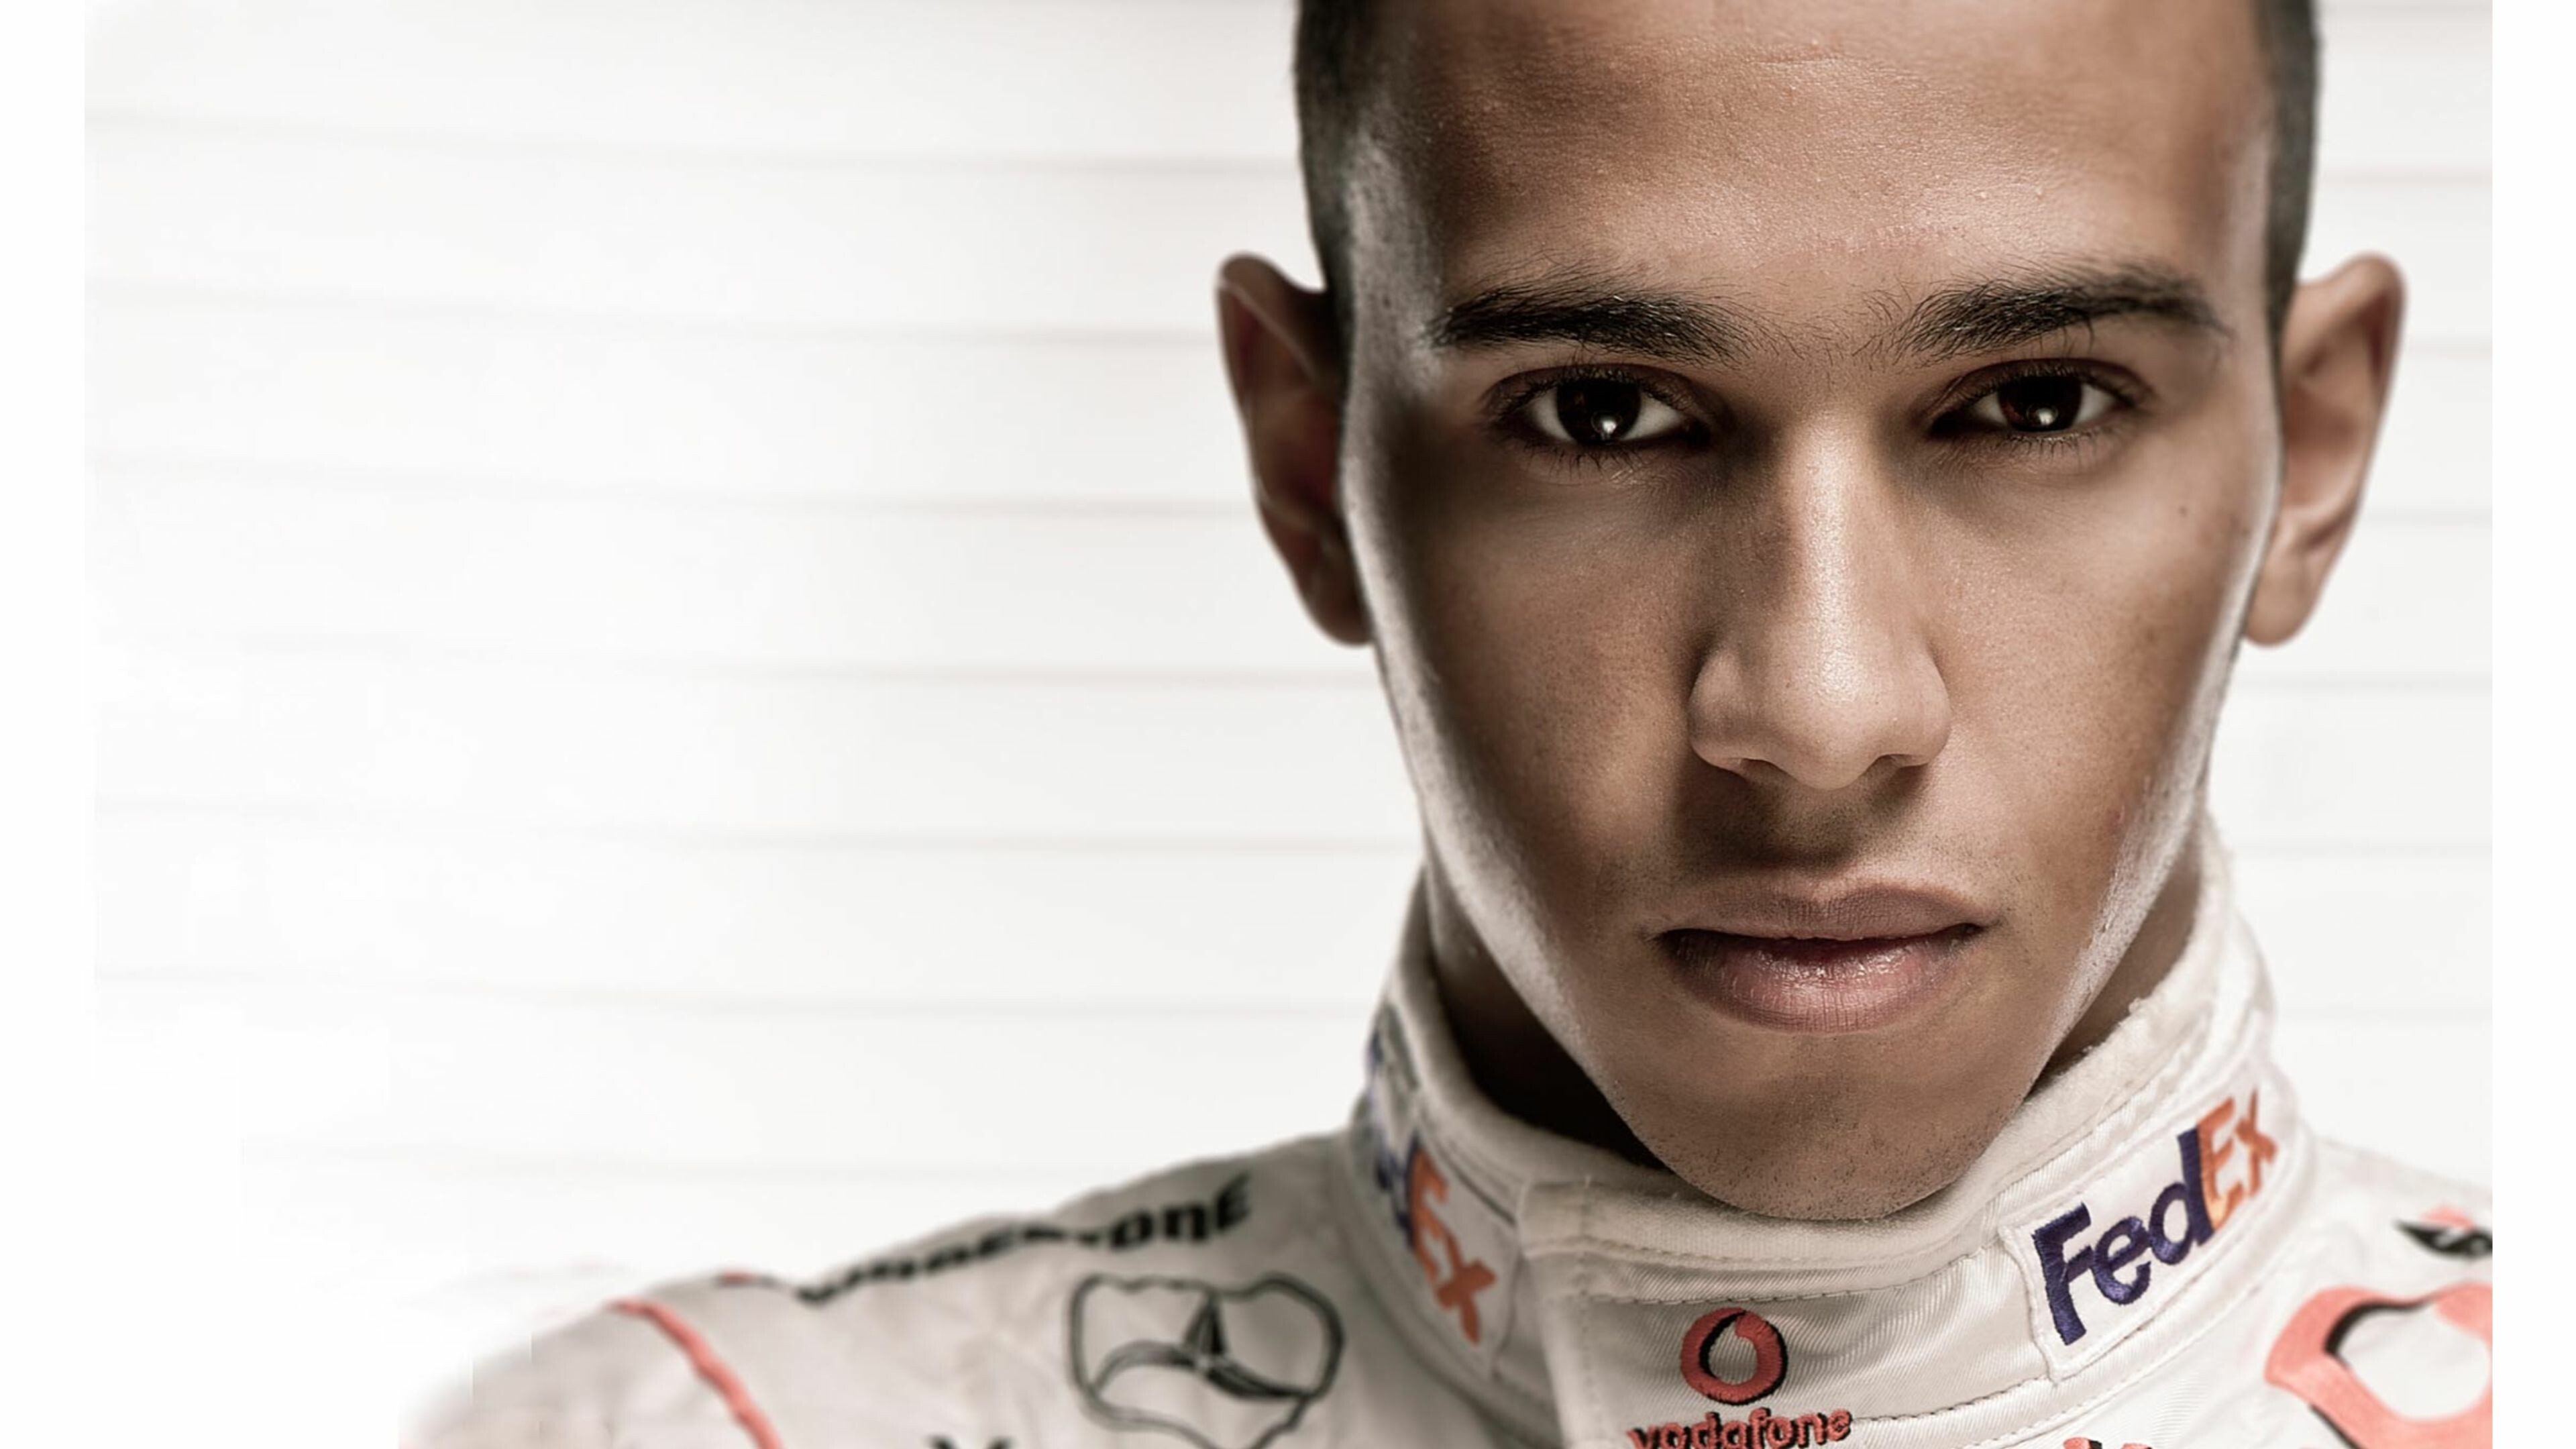 Lewis Hamilton: The first Black driver to win the F1 world drivers’ championship, 2008, Formula 1. 3840x2160 4K Wallpaper.